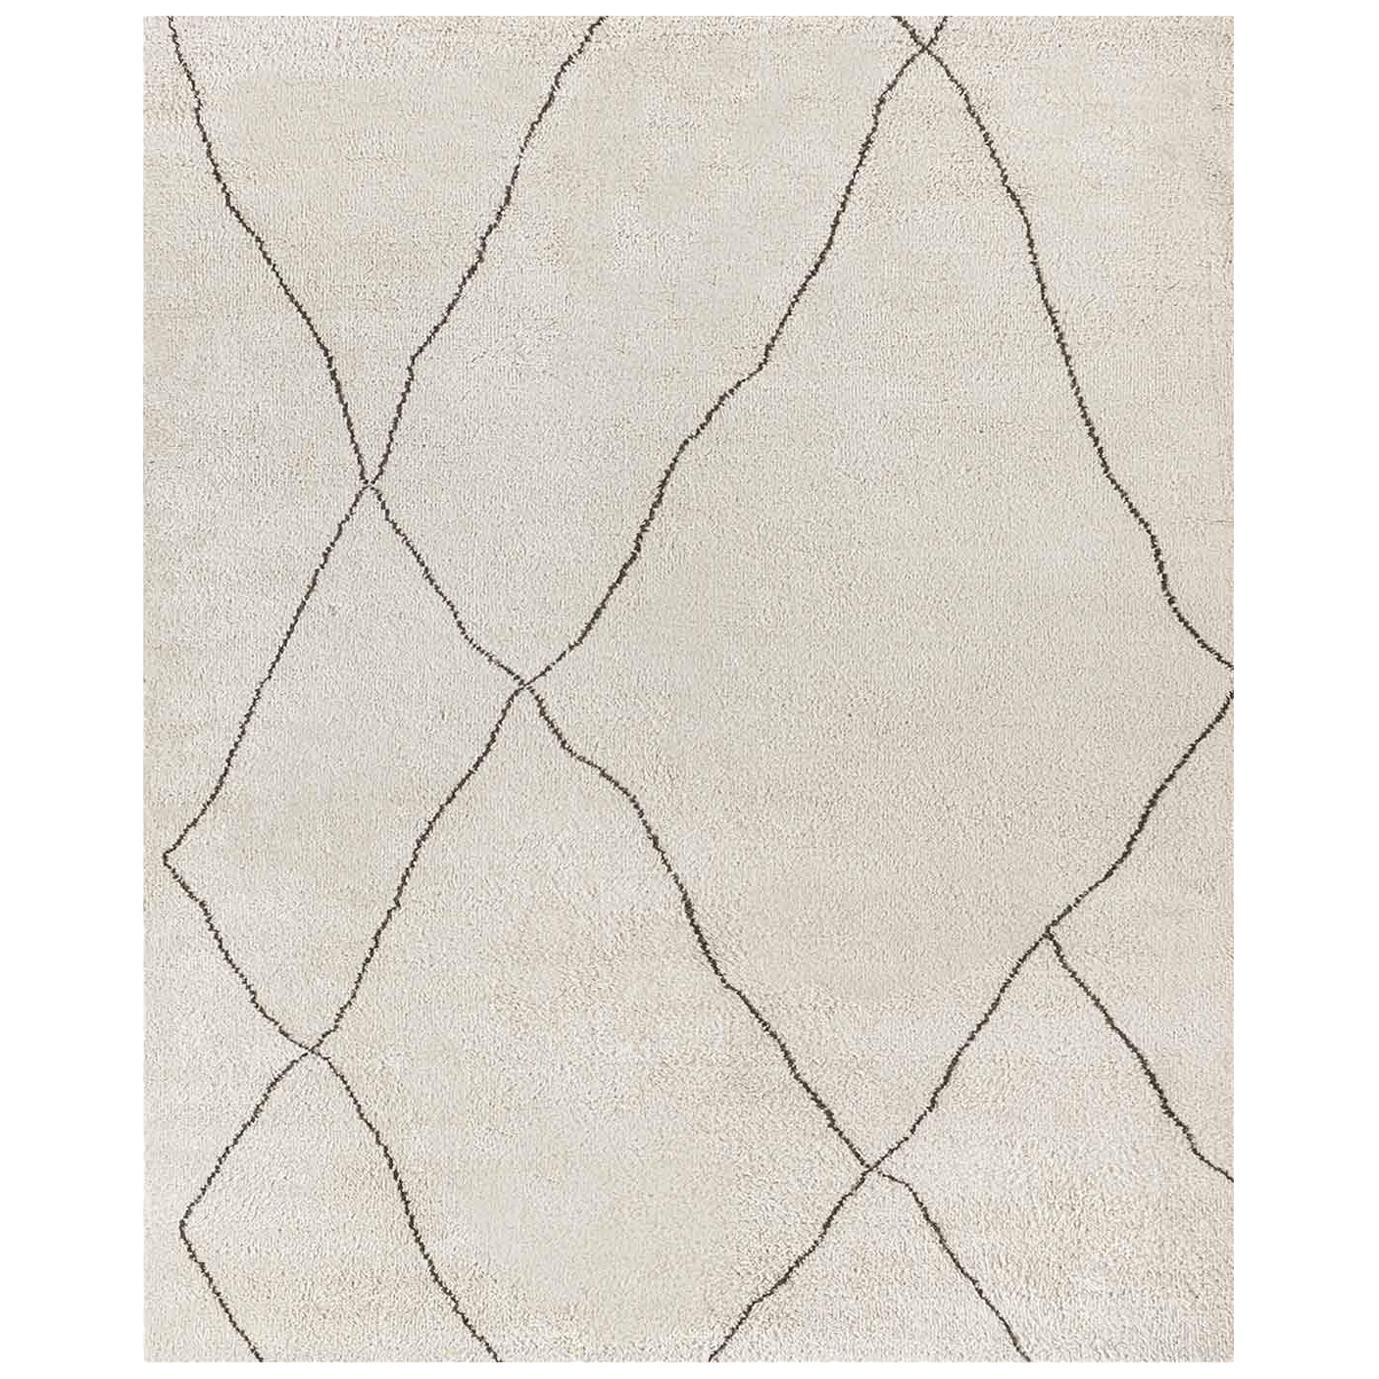 For Sale: Beige (Bisque/Cafe) Ben Soleimani Iona Rug– Moroccan Hand-knotted Wool Bisque/Cafe 8'x10'